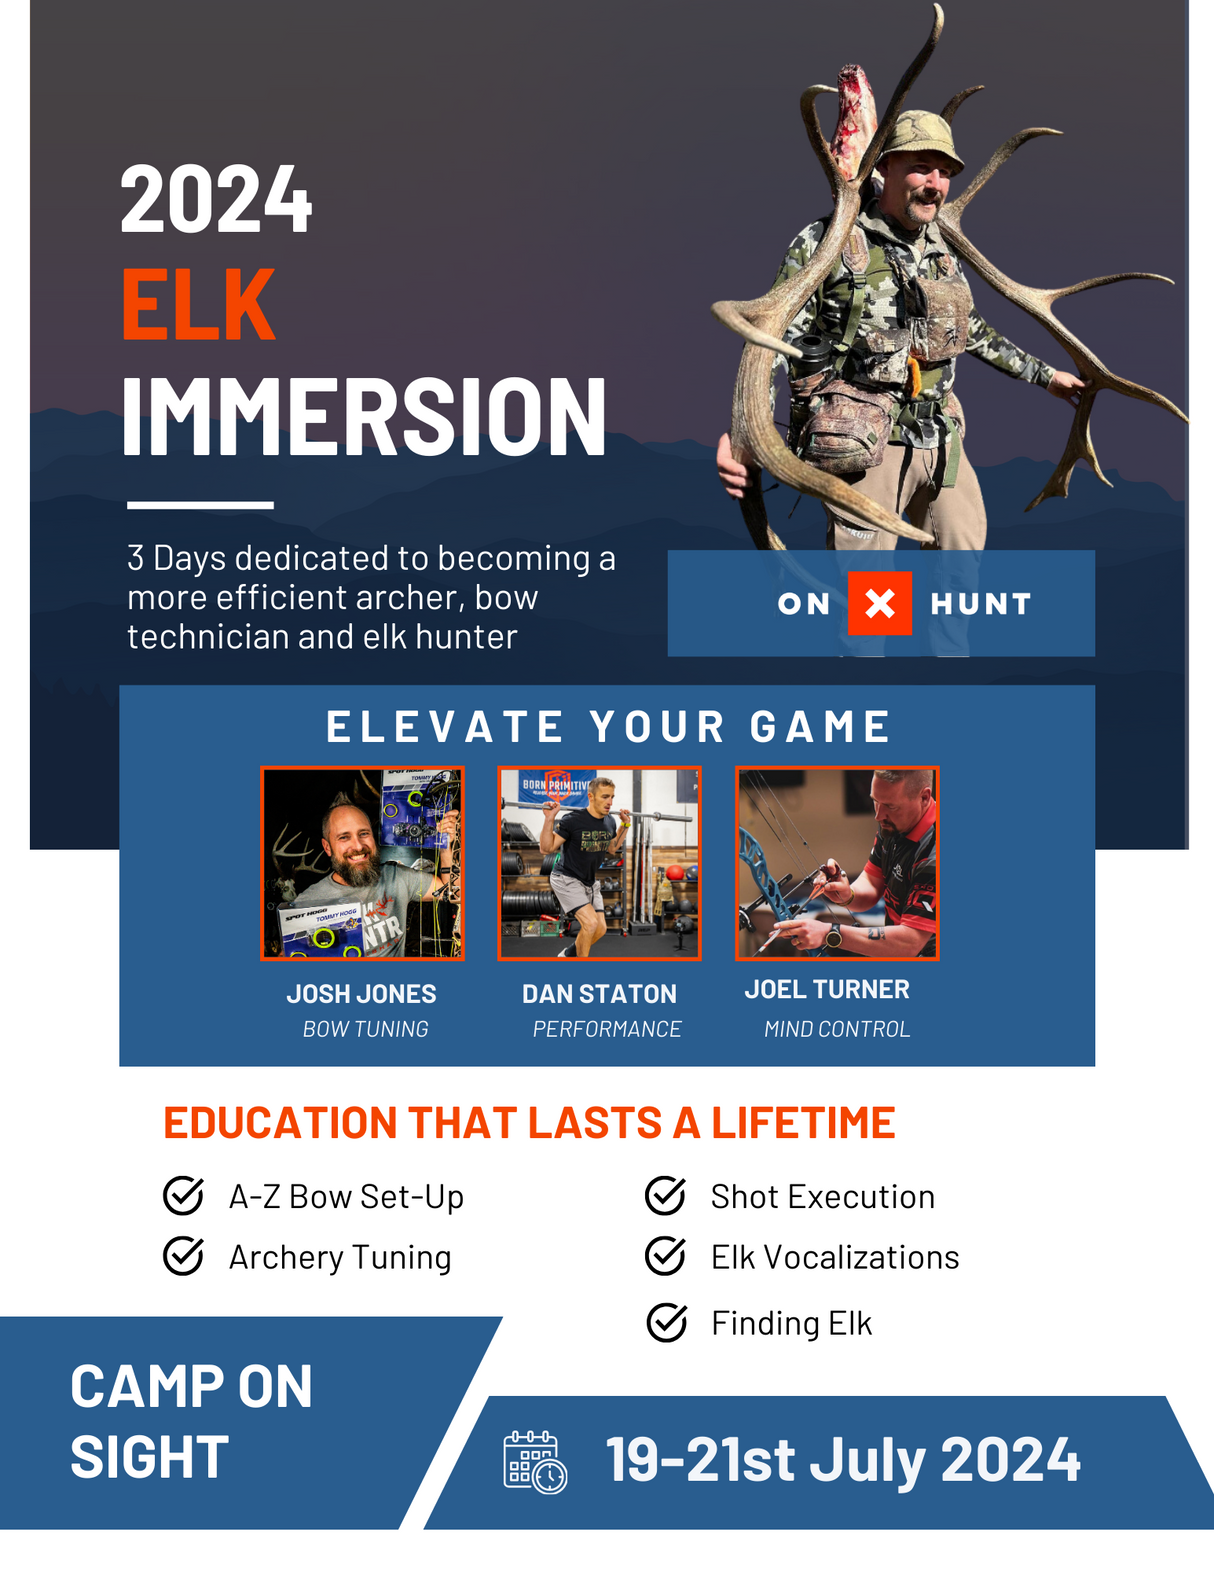 ELK IMMERSION EXPERIENCE